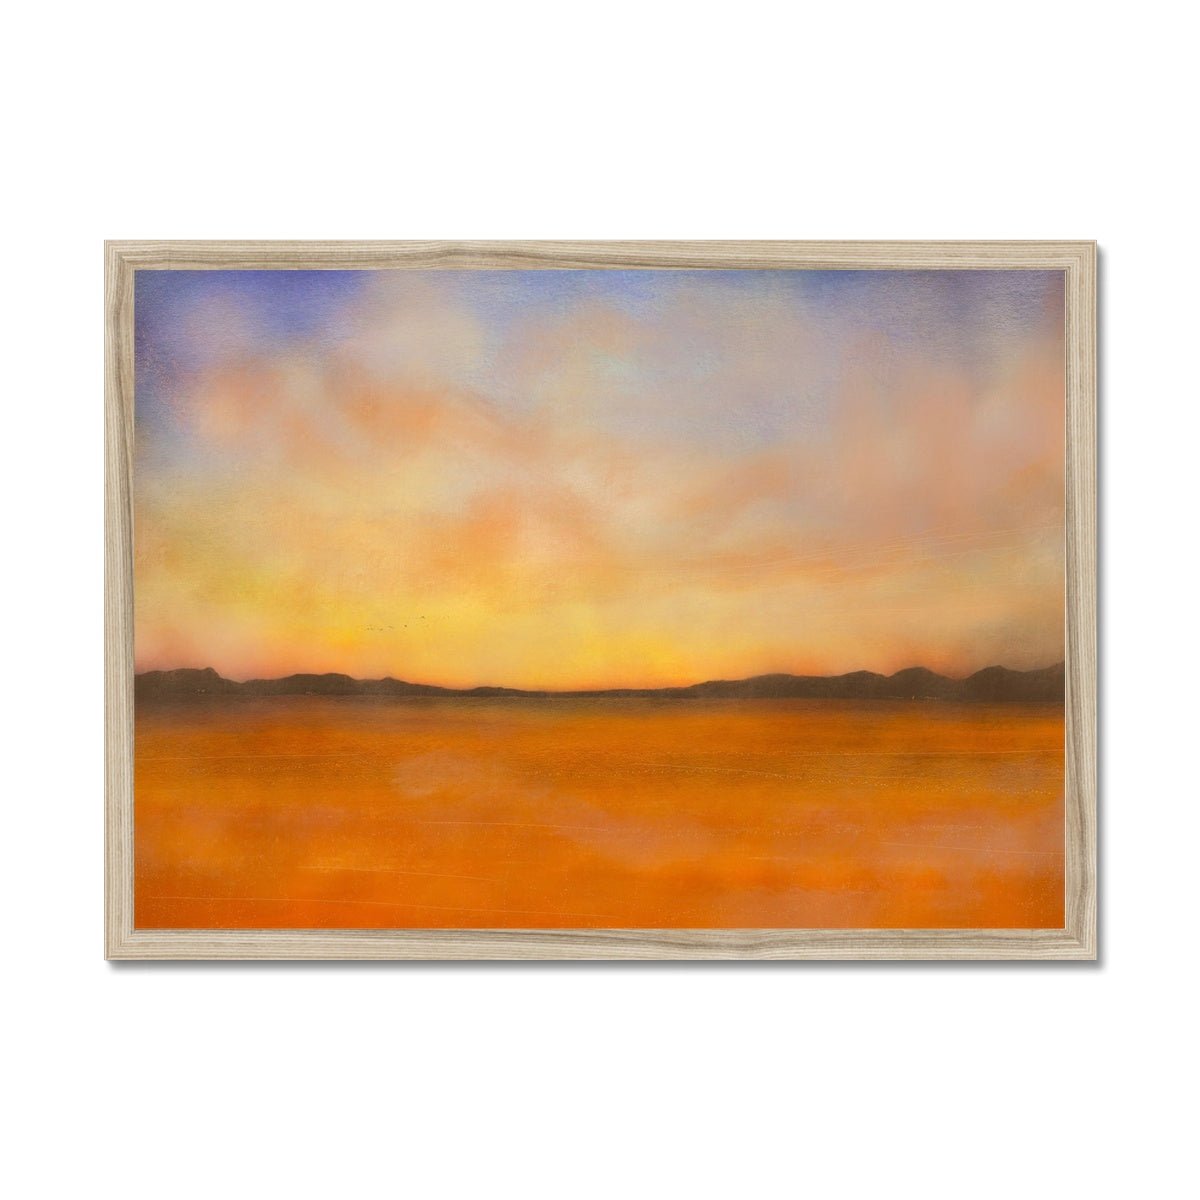 Islay Dawn Painting | Framed Prints From Scotland-Framed Prints-Hebridean Islands Art Gallery-A2 Landscape-Natural Frame-Paintings, Prints, Homeware, Art Gifts From Scotland By Scottish Artist Kevin Hunter